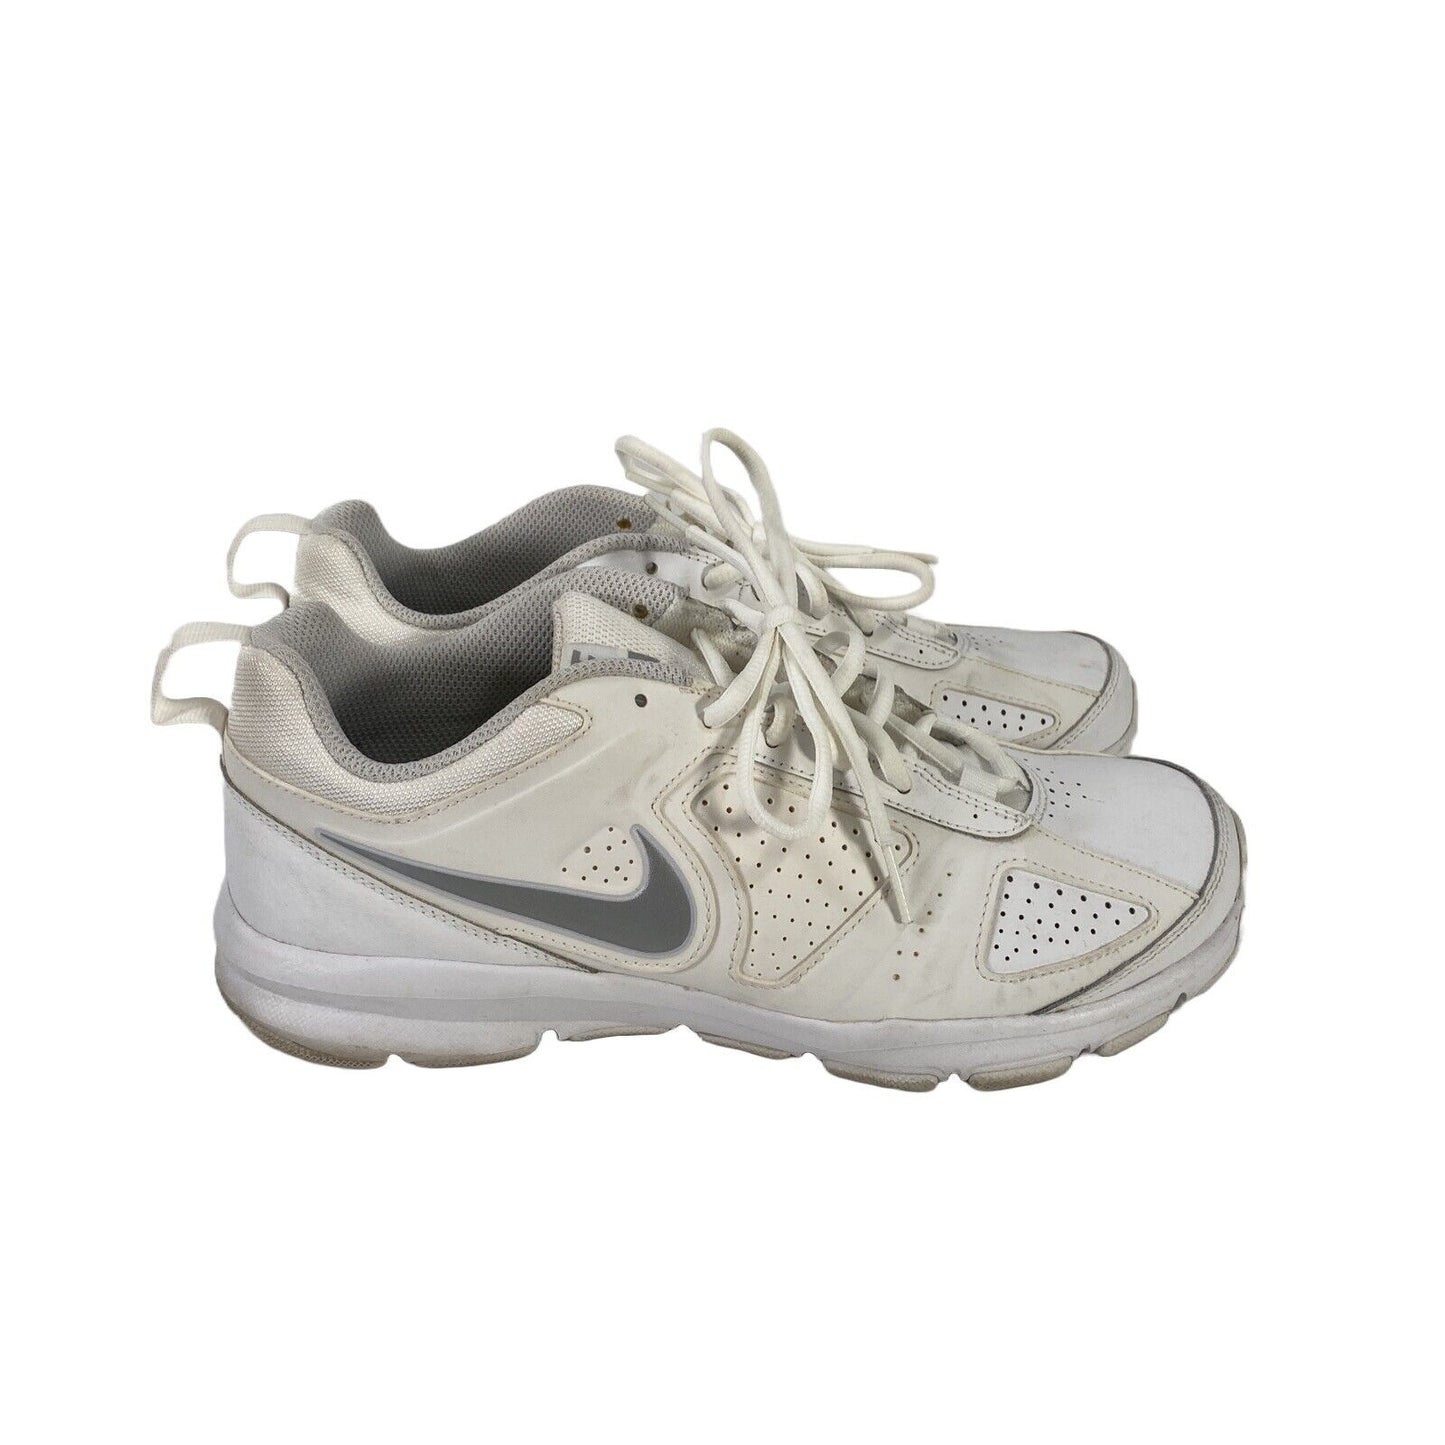 Nike Women's White Leather Lace Up T-Lite XI Athletic Shoes 610232 - 9.5